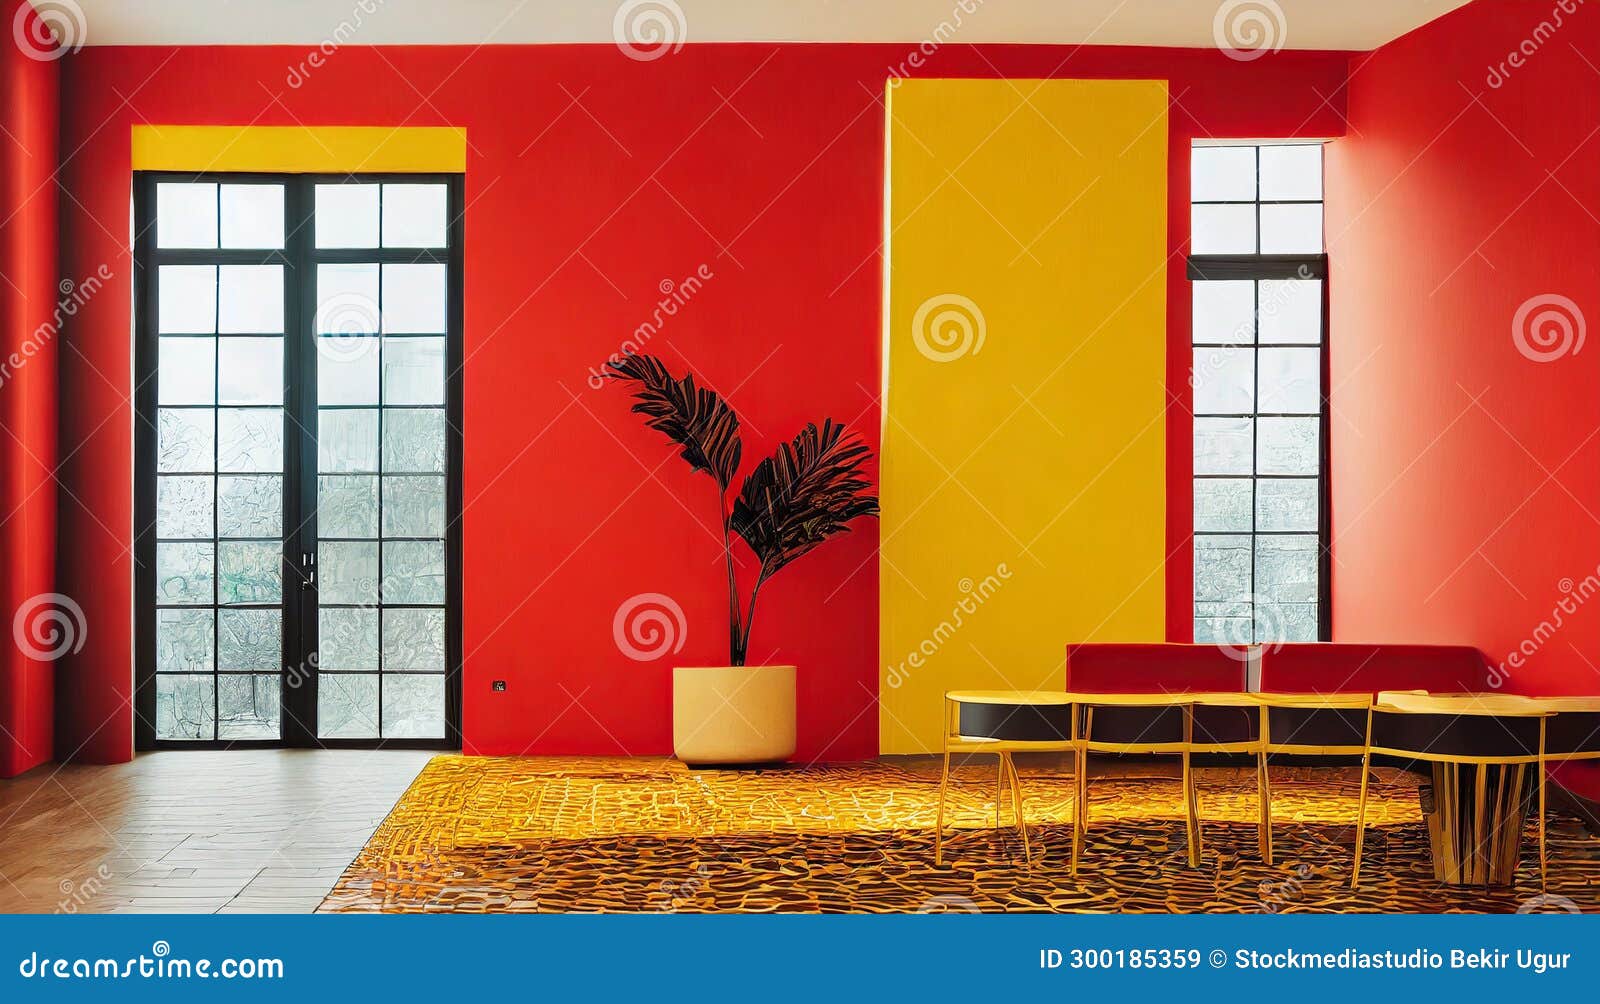 intricate minimalism vibrant hues mastered in jazzy interiors